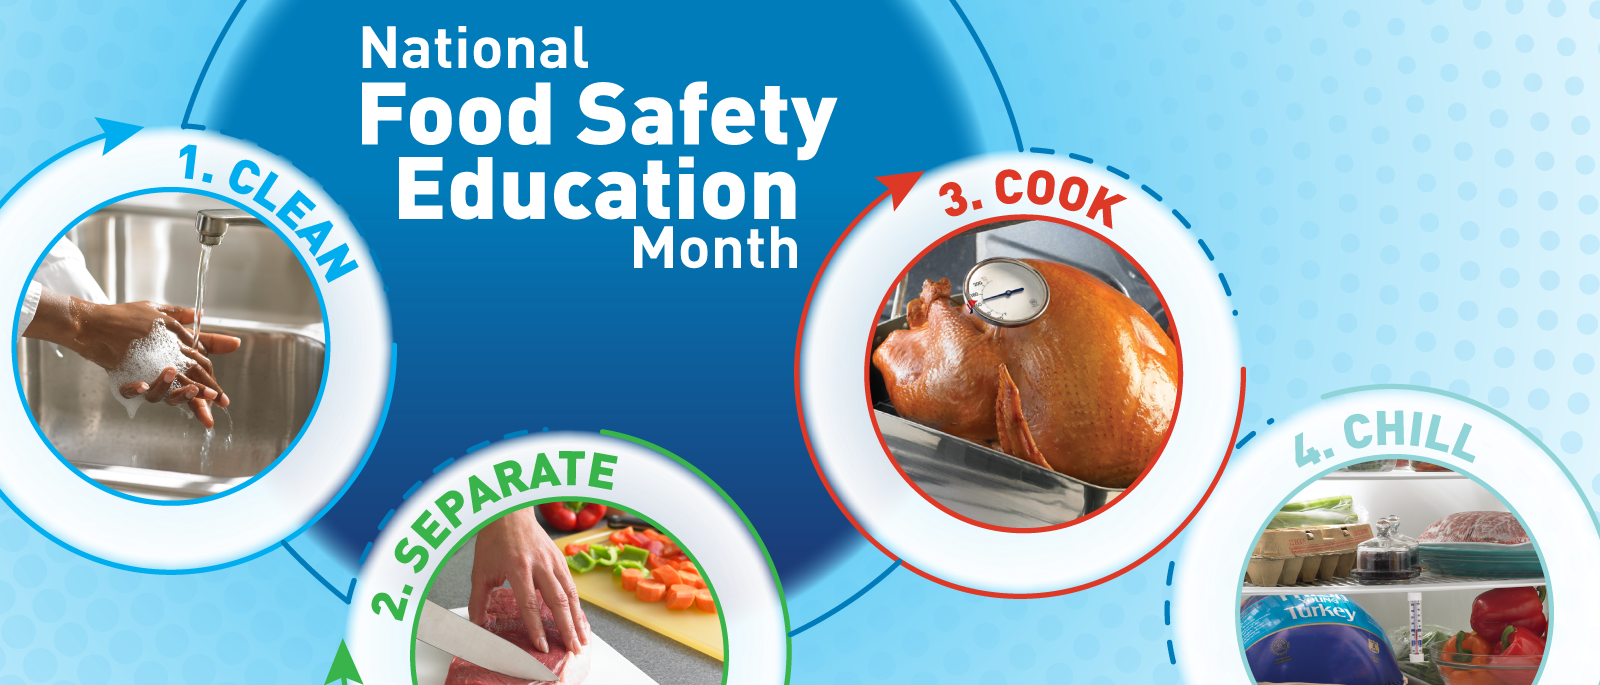 September is National Food Safety Education Month!